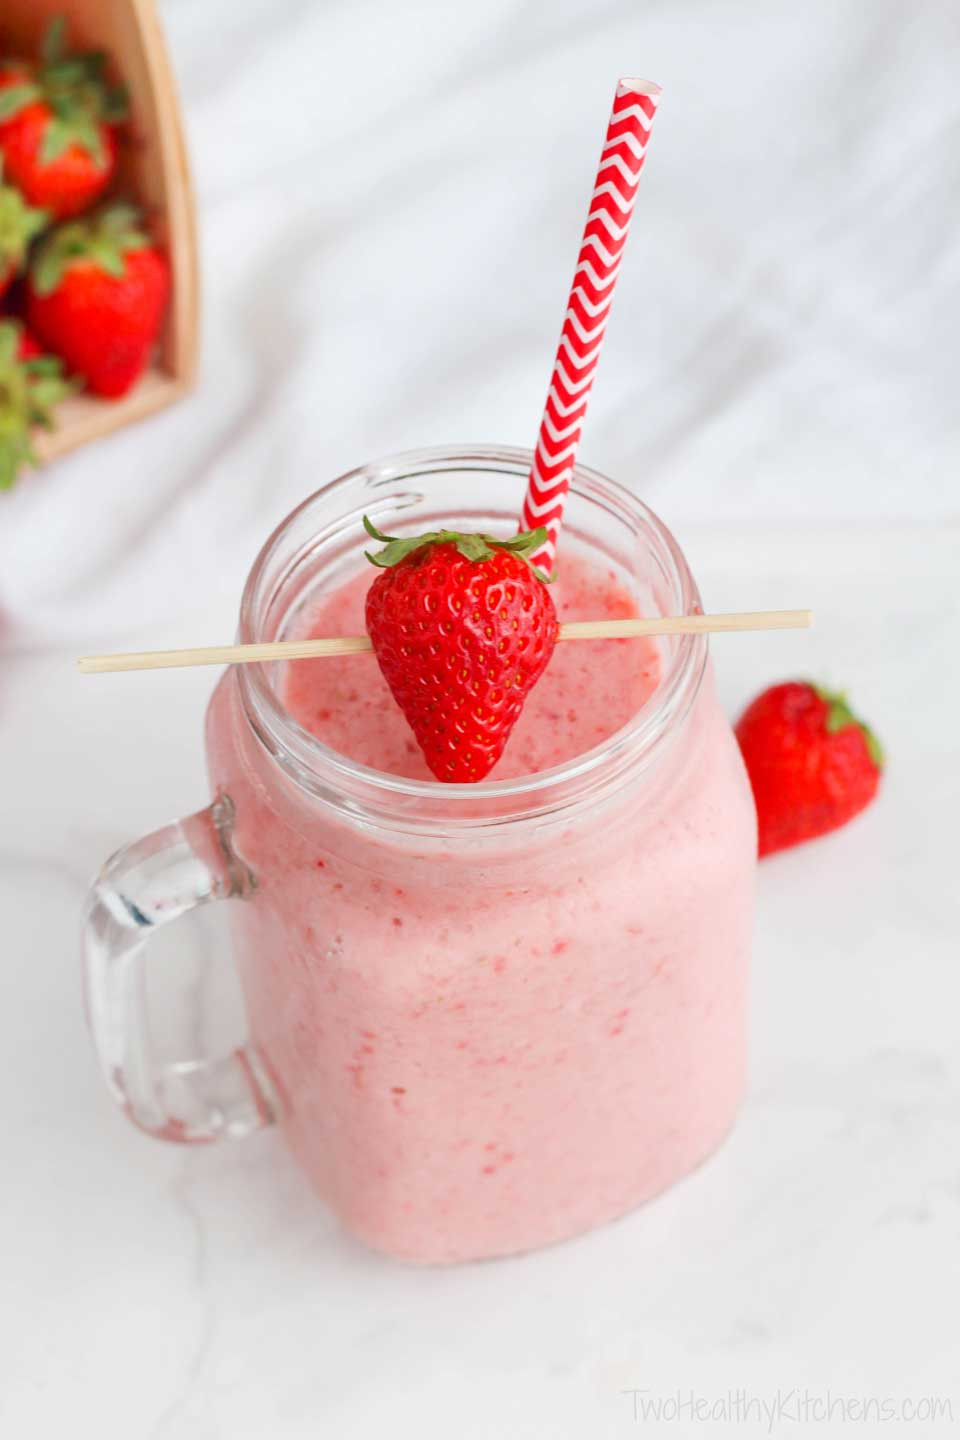 Valentines Day Smoothies Unique Easy Healthy Valentine S Day Treats and Snacks Two